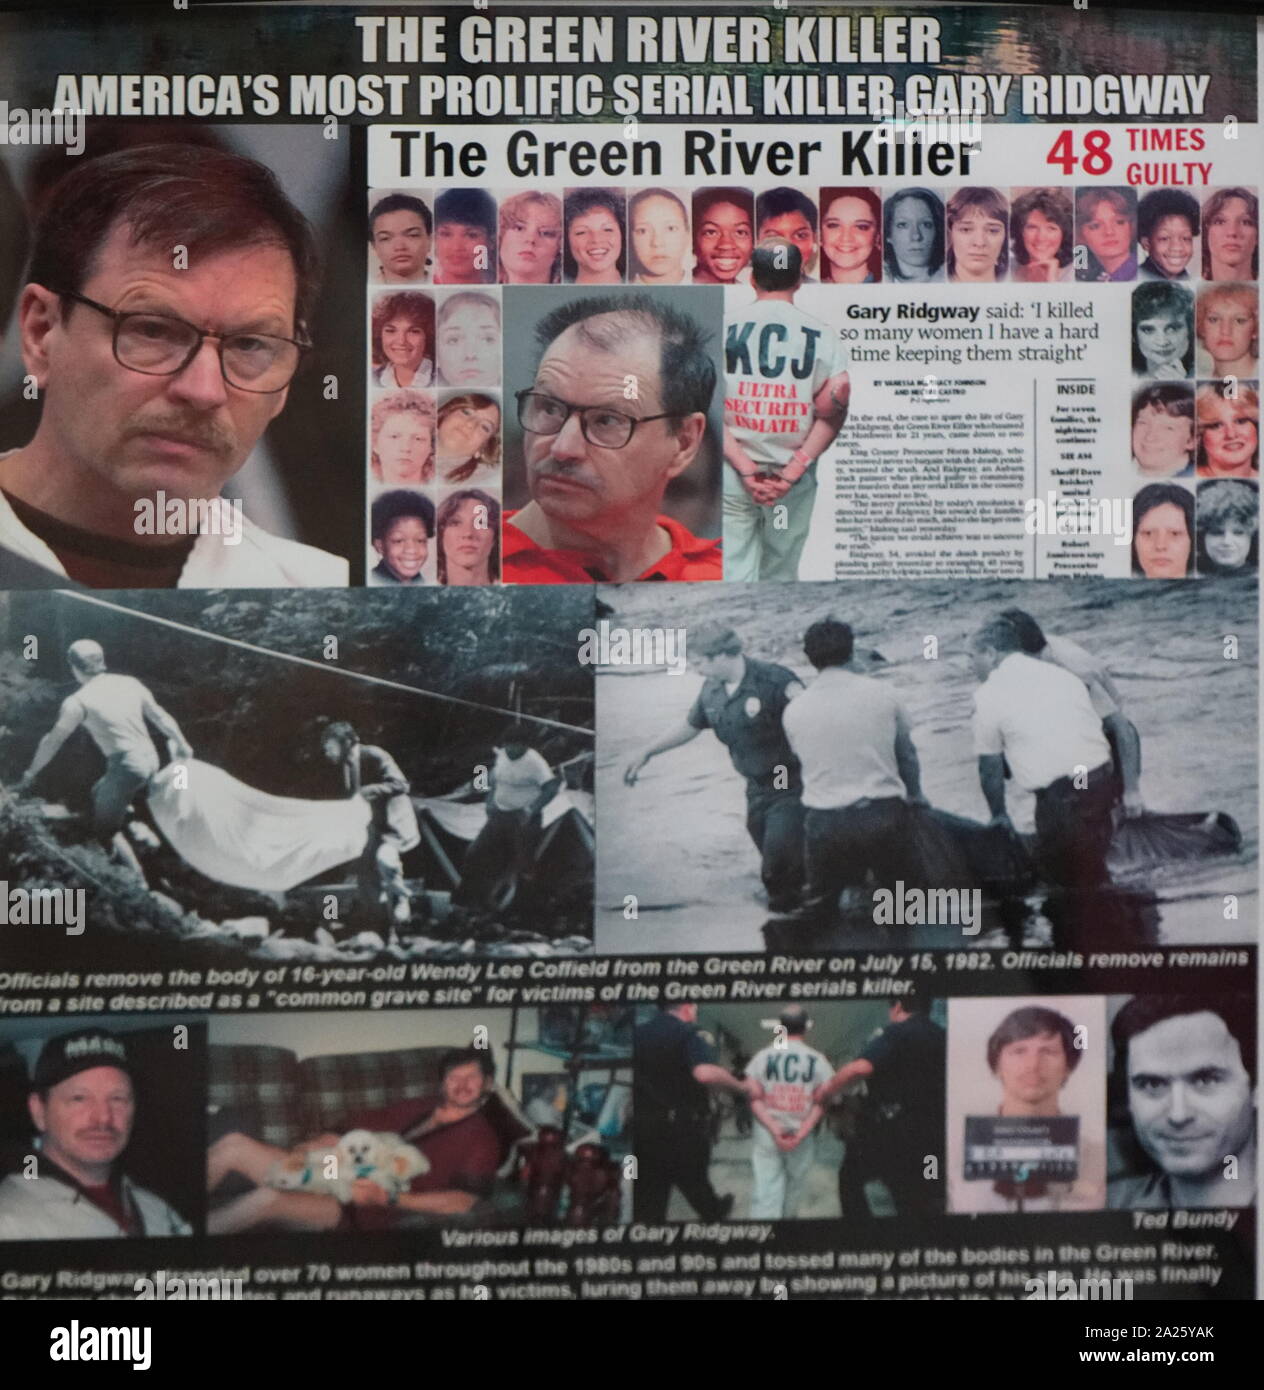 Montage of pictures and newspapers of Gary Ridgway (The Green River Killer). Gary Leon Ridgway (1949-) an American serial killer who was convicted of 48 separate murders. Stock Photo